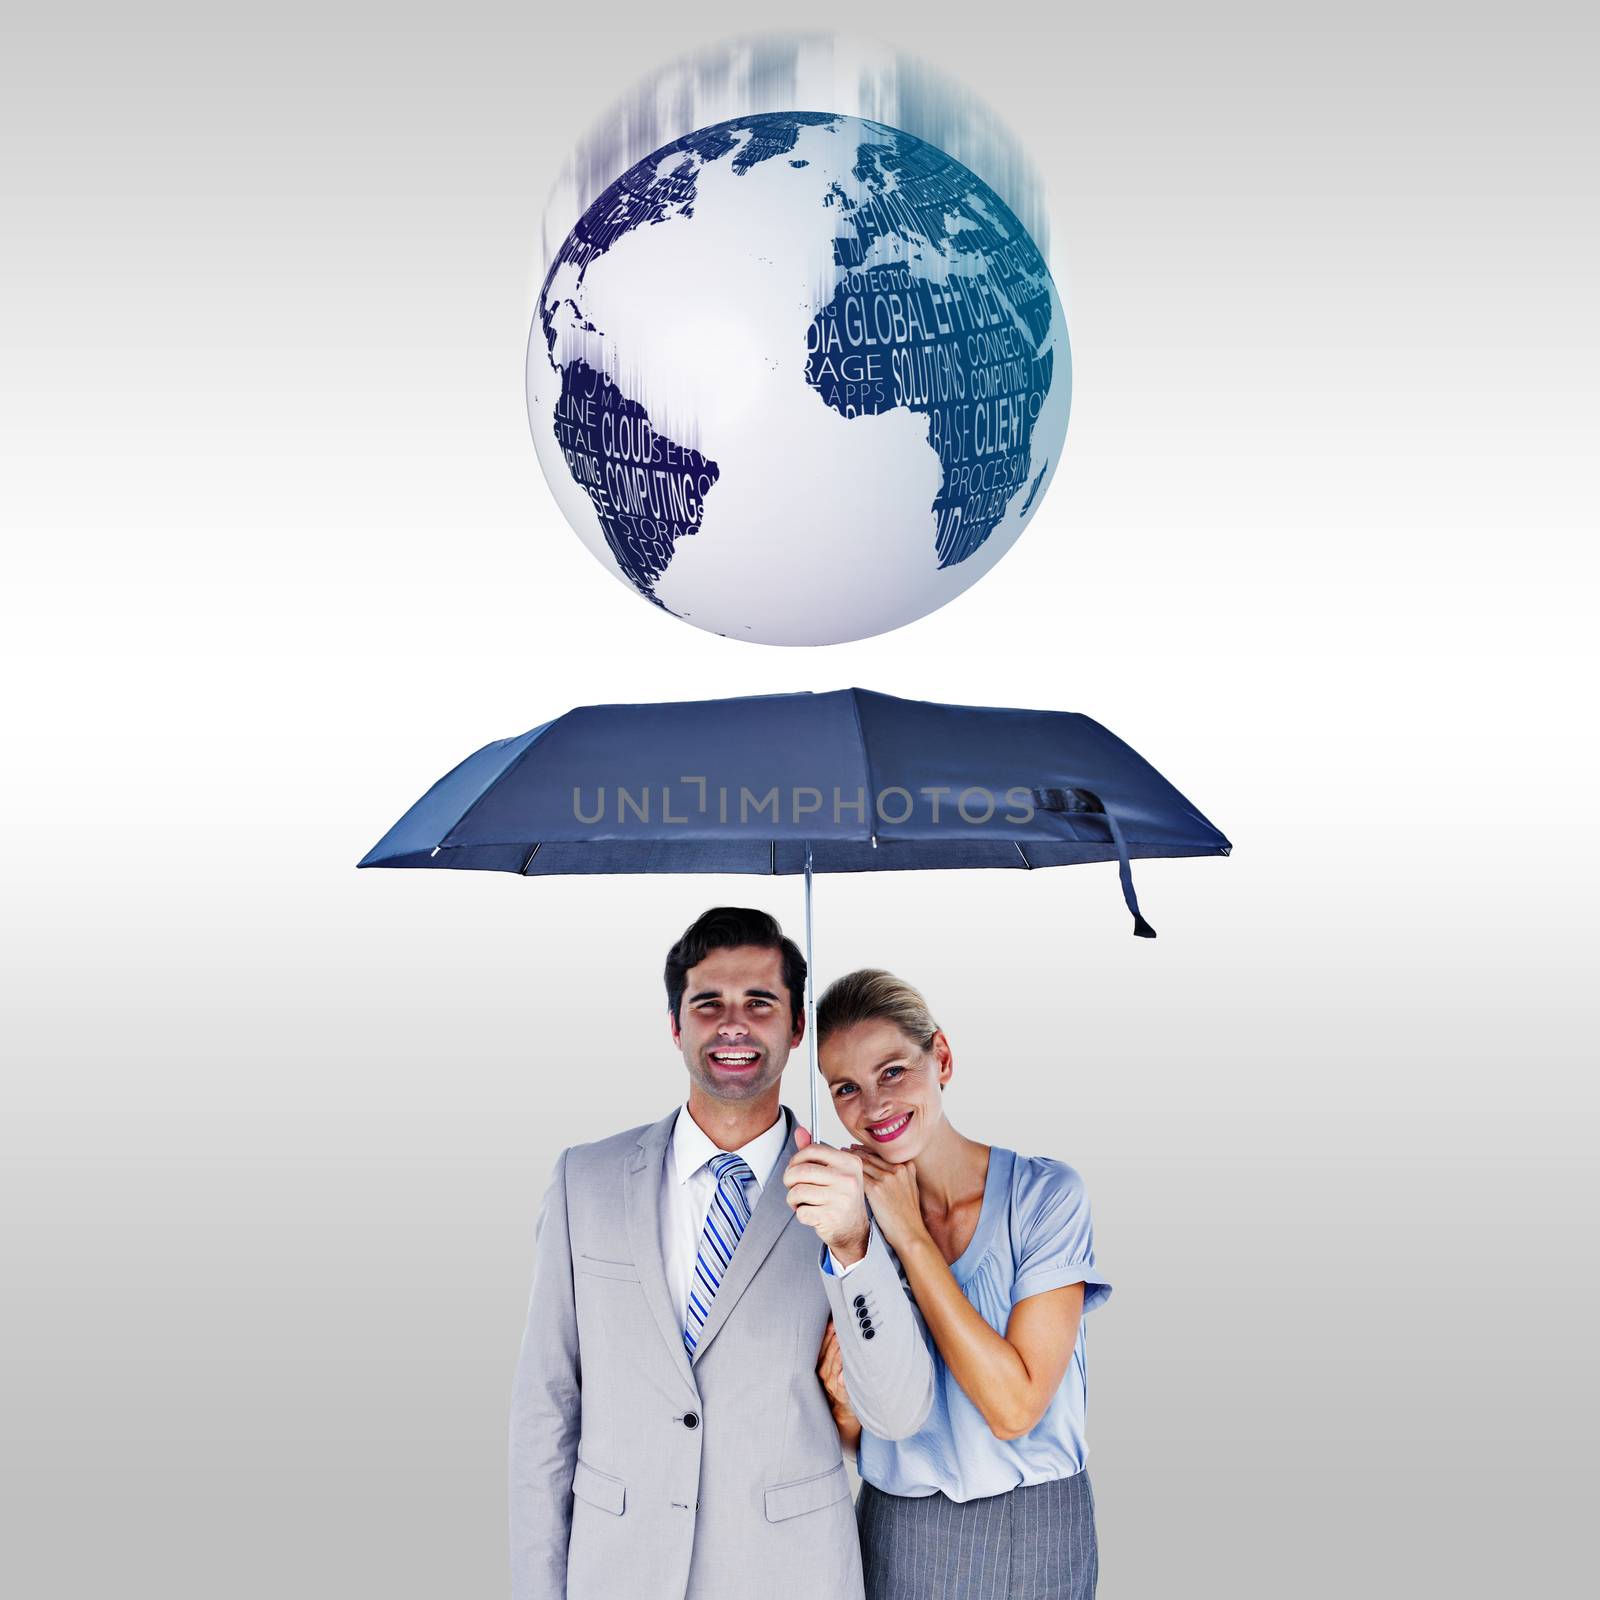 Composite image of business people holding a black umbrella by Wavebreakmedia